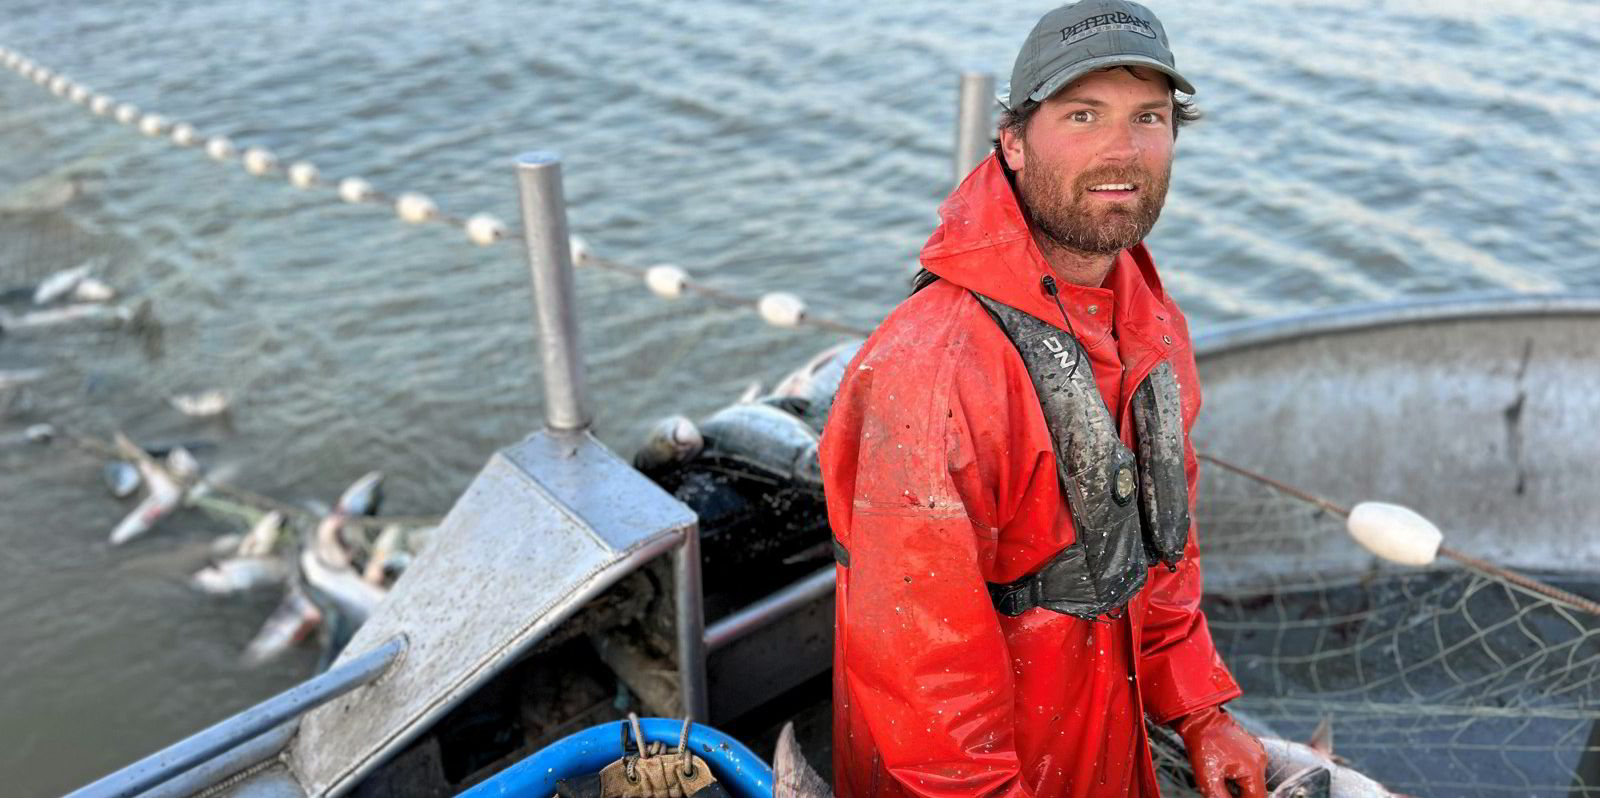 Fishermen's group floats petition calling for state to mediate Bristol Bay  salmon price dispute